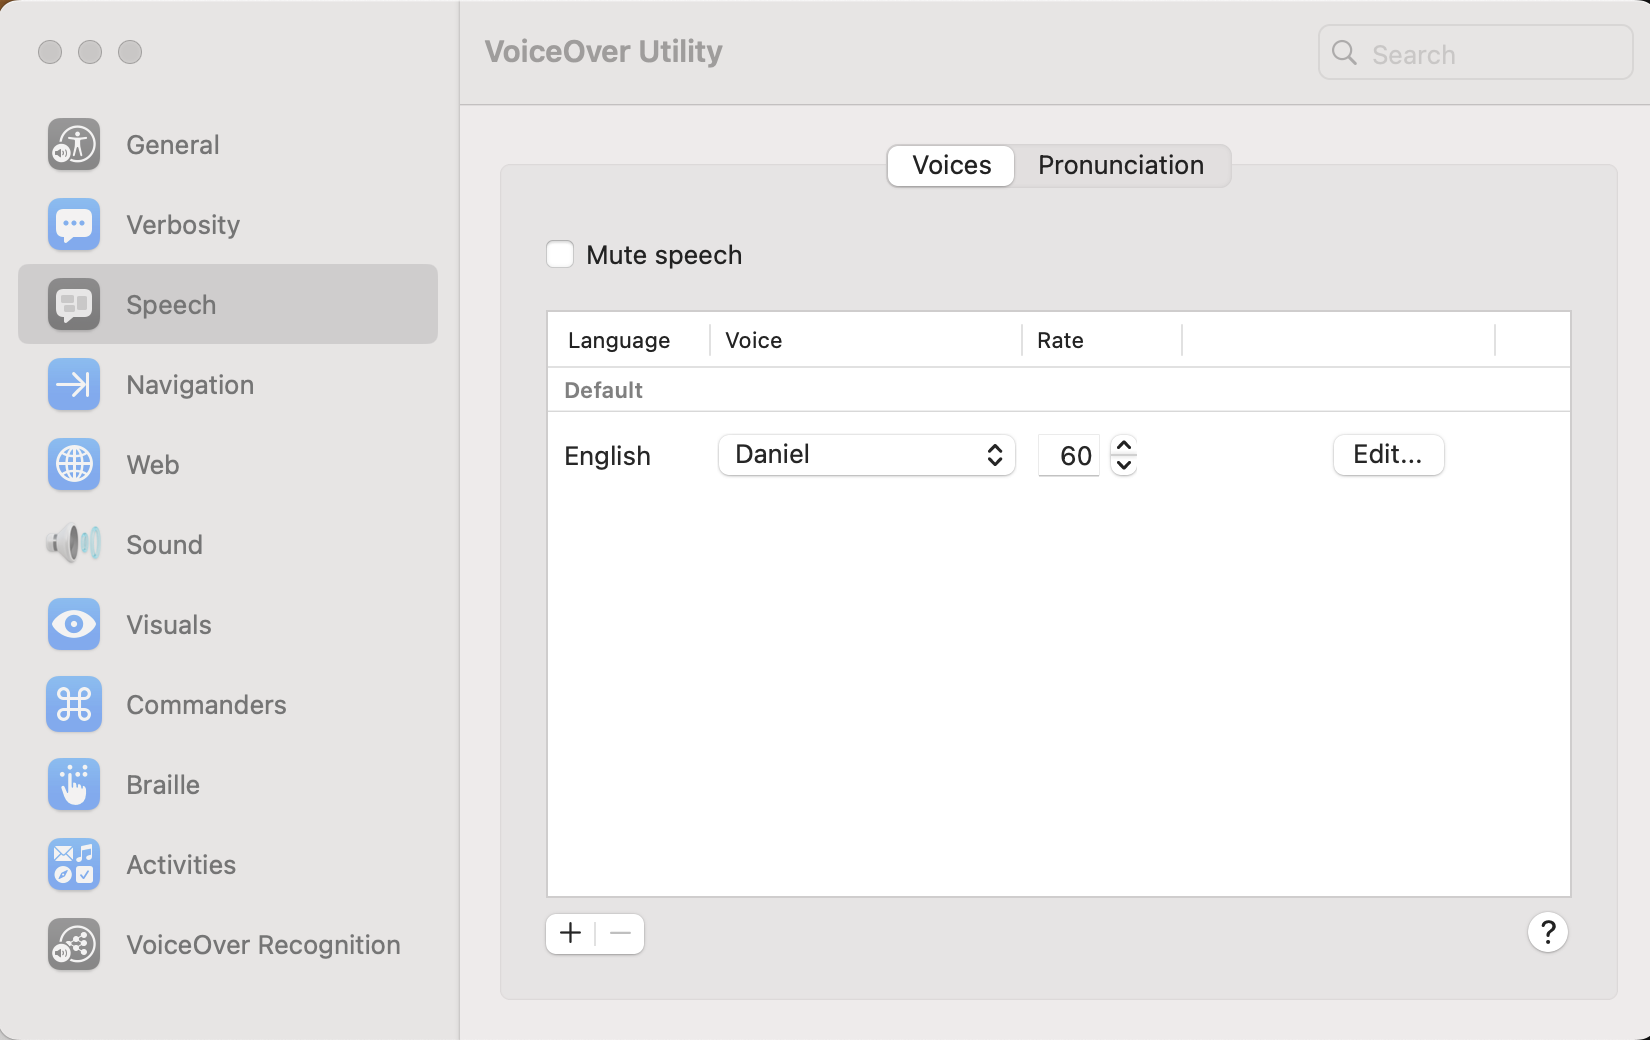 Voiceover settings showing location of the speech options